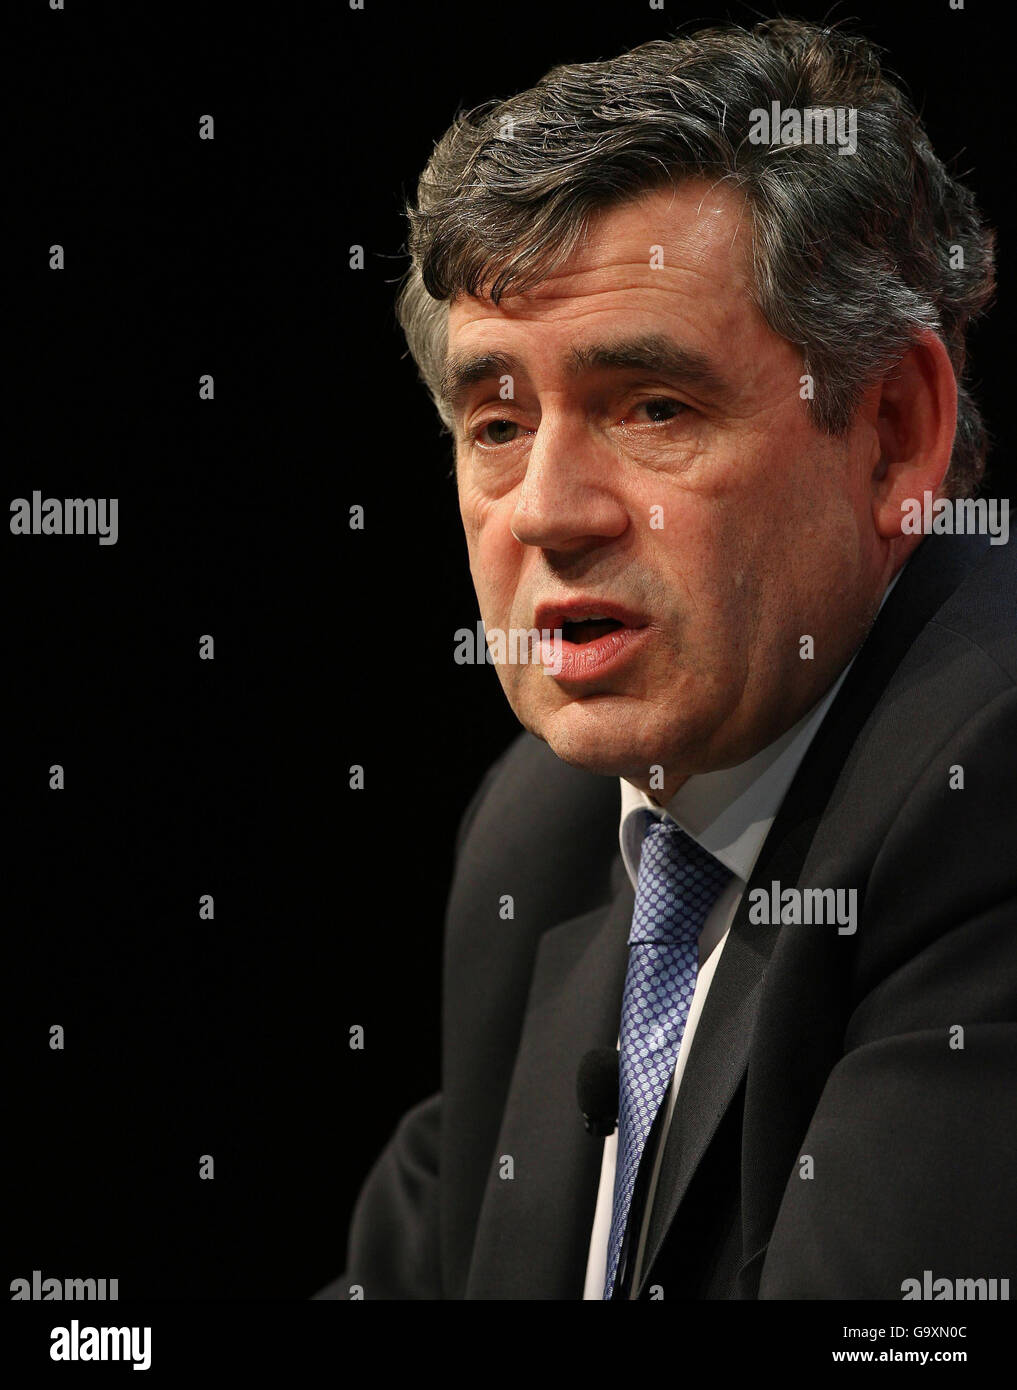 Chancellor Gordon Brown during a questions and answers session with Oona King at Manchester's C.I.S Building. Stock Photo